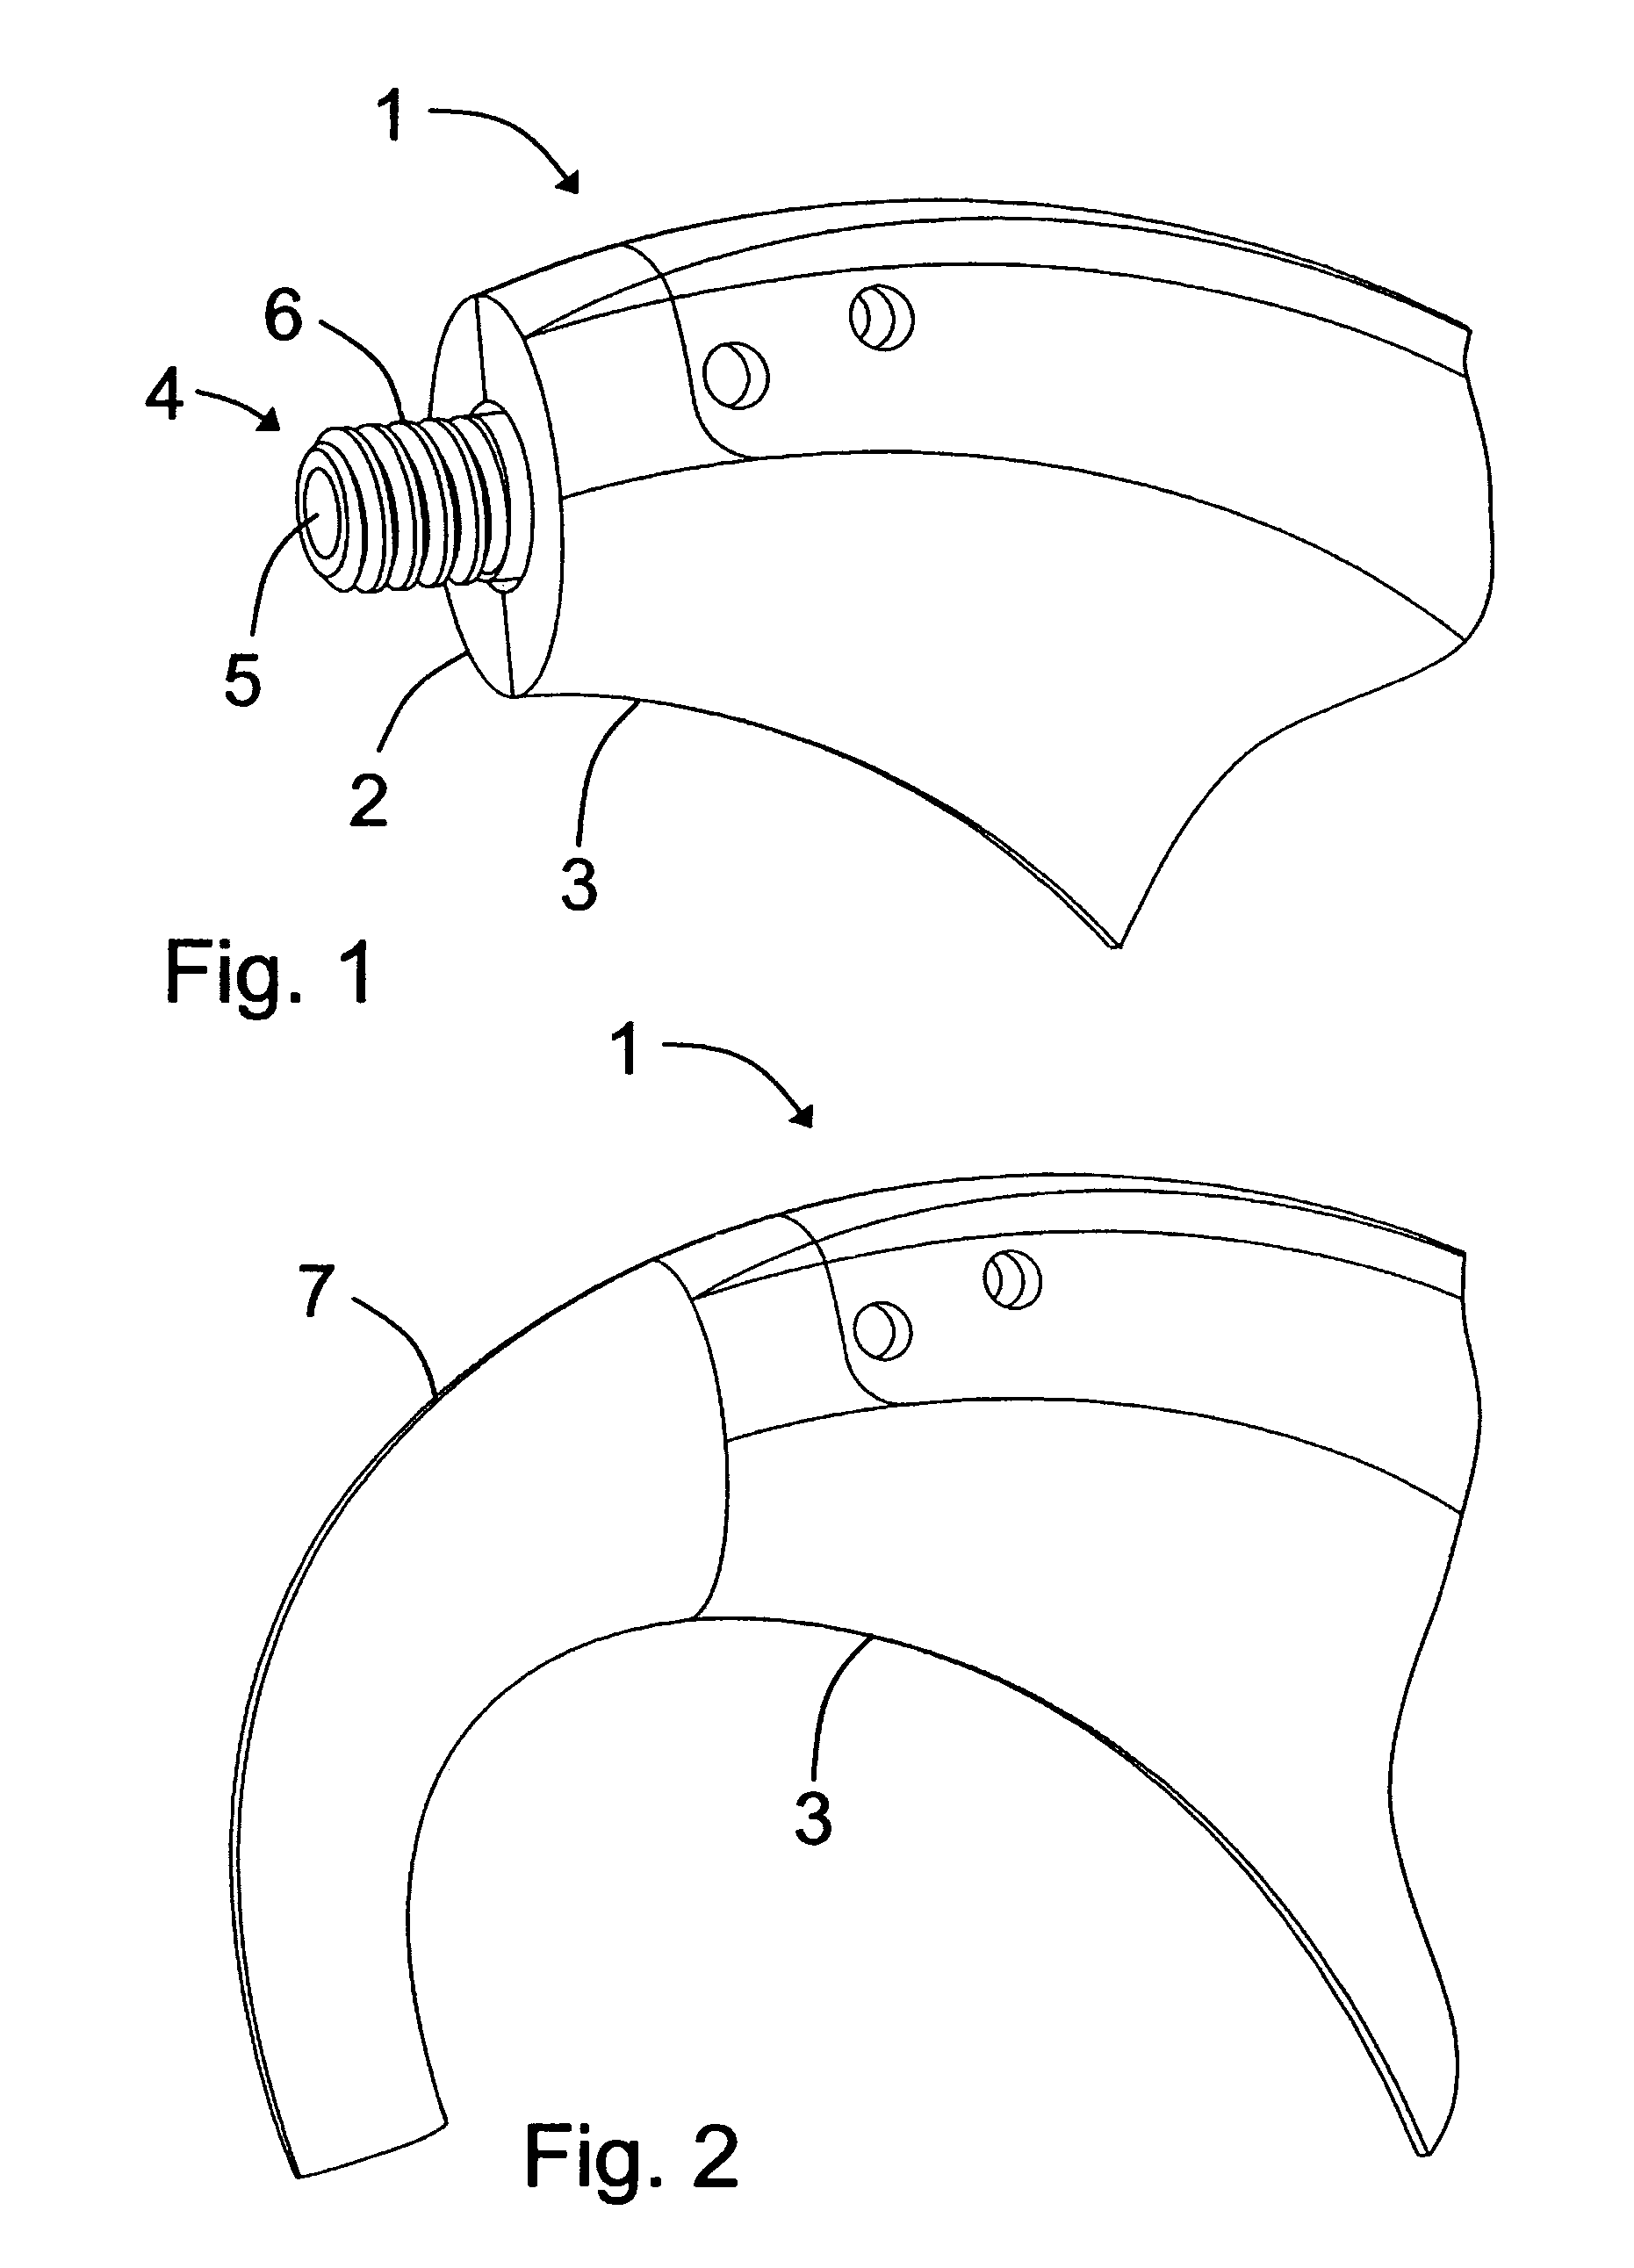 Interchangeable attachment means for attaching a conductor to a hearing aid